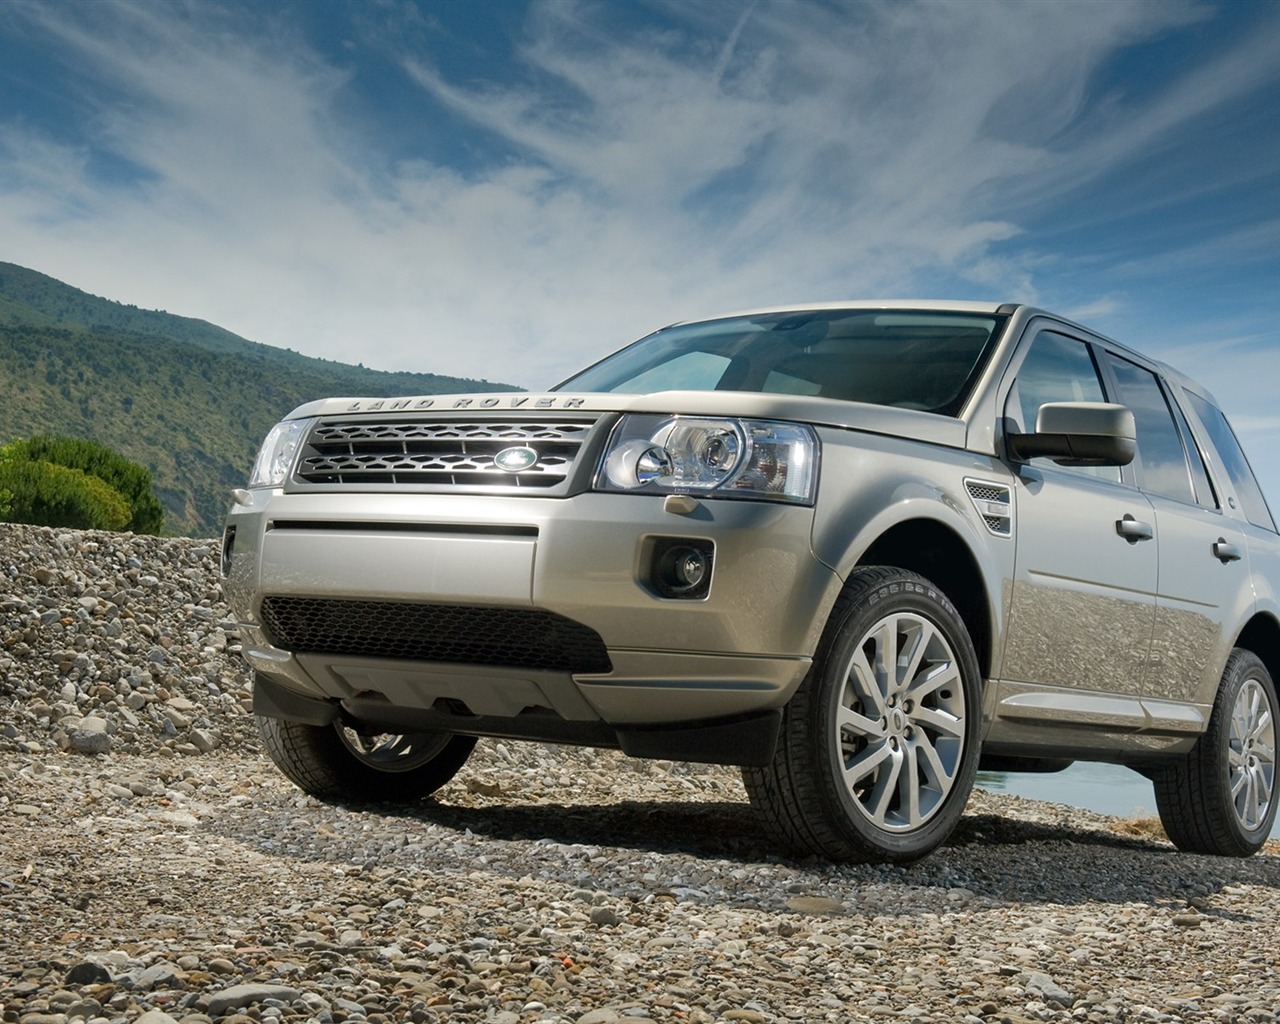 Land Rover wallpapers 2011 (1) #5 - 1280x1024